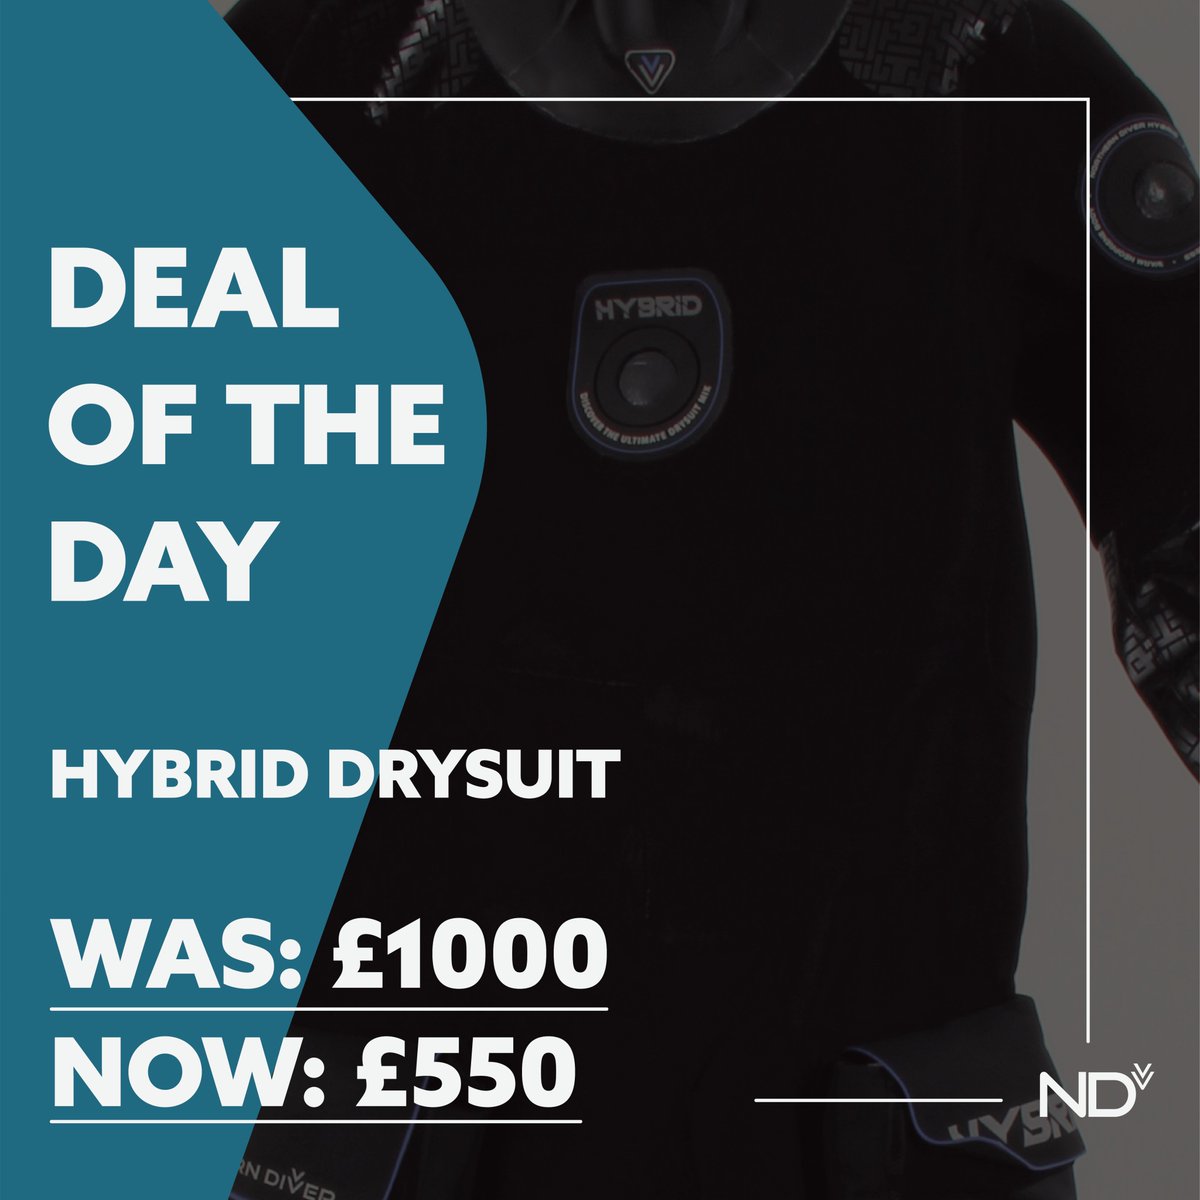 🌟 Save £450 on our premium Hybrid drysuit! Crafted with unparalleled quality & innovation, this deal is a must for serious divers. Dive in and save today! 💦 ndiver.com/outlet-hybrid-… #DealOfTheDay #DiveGear #Drysuit #Sale #ScubaSale #Scuba #Diving 🐬